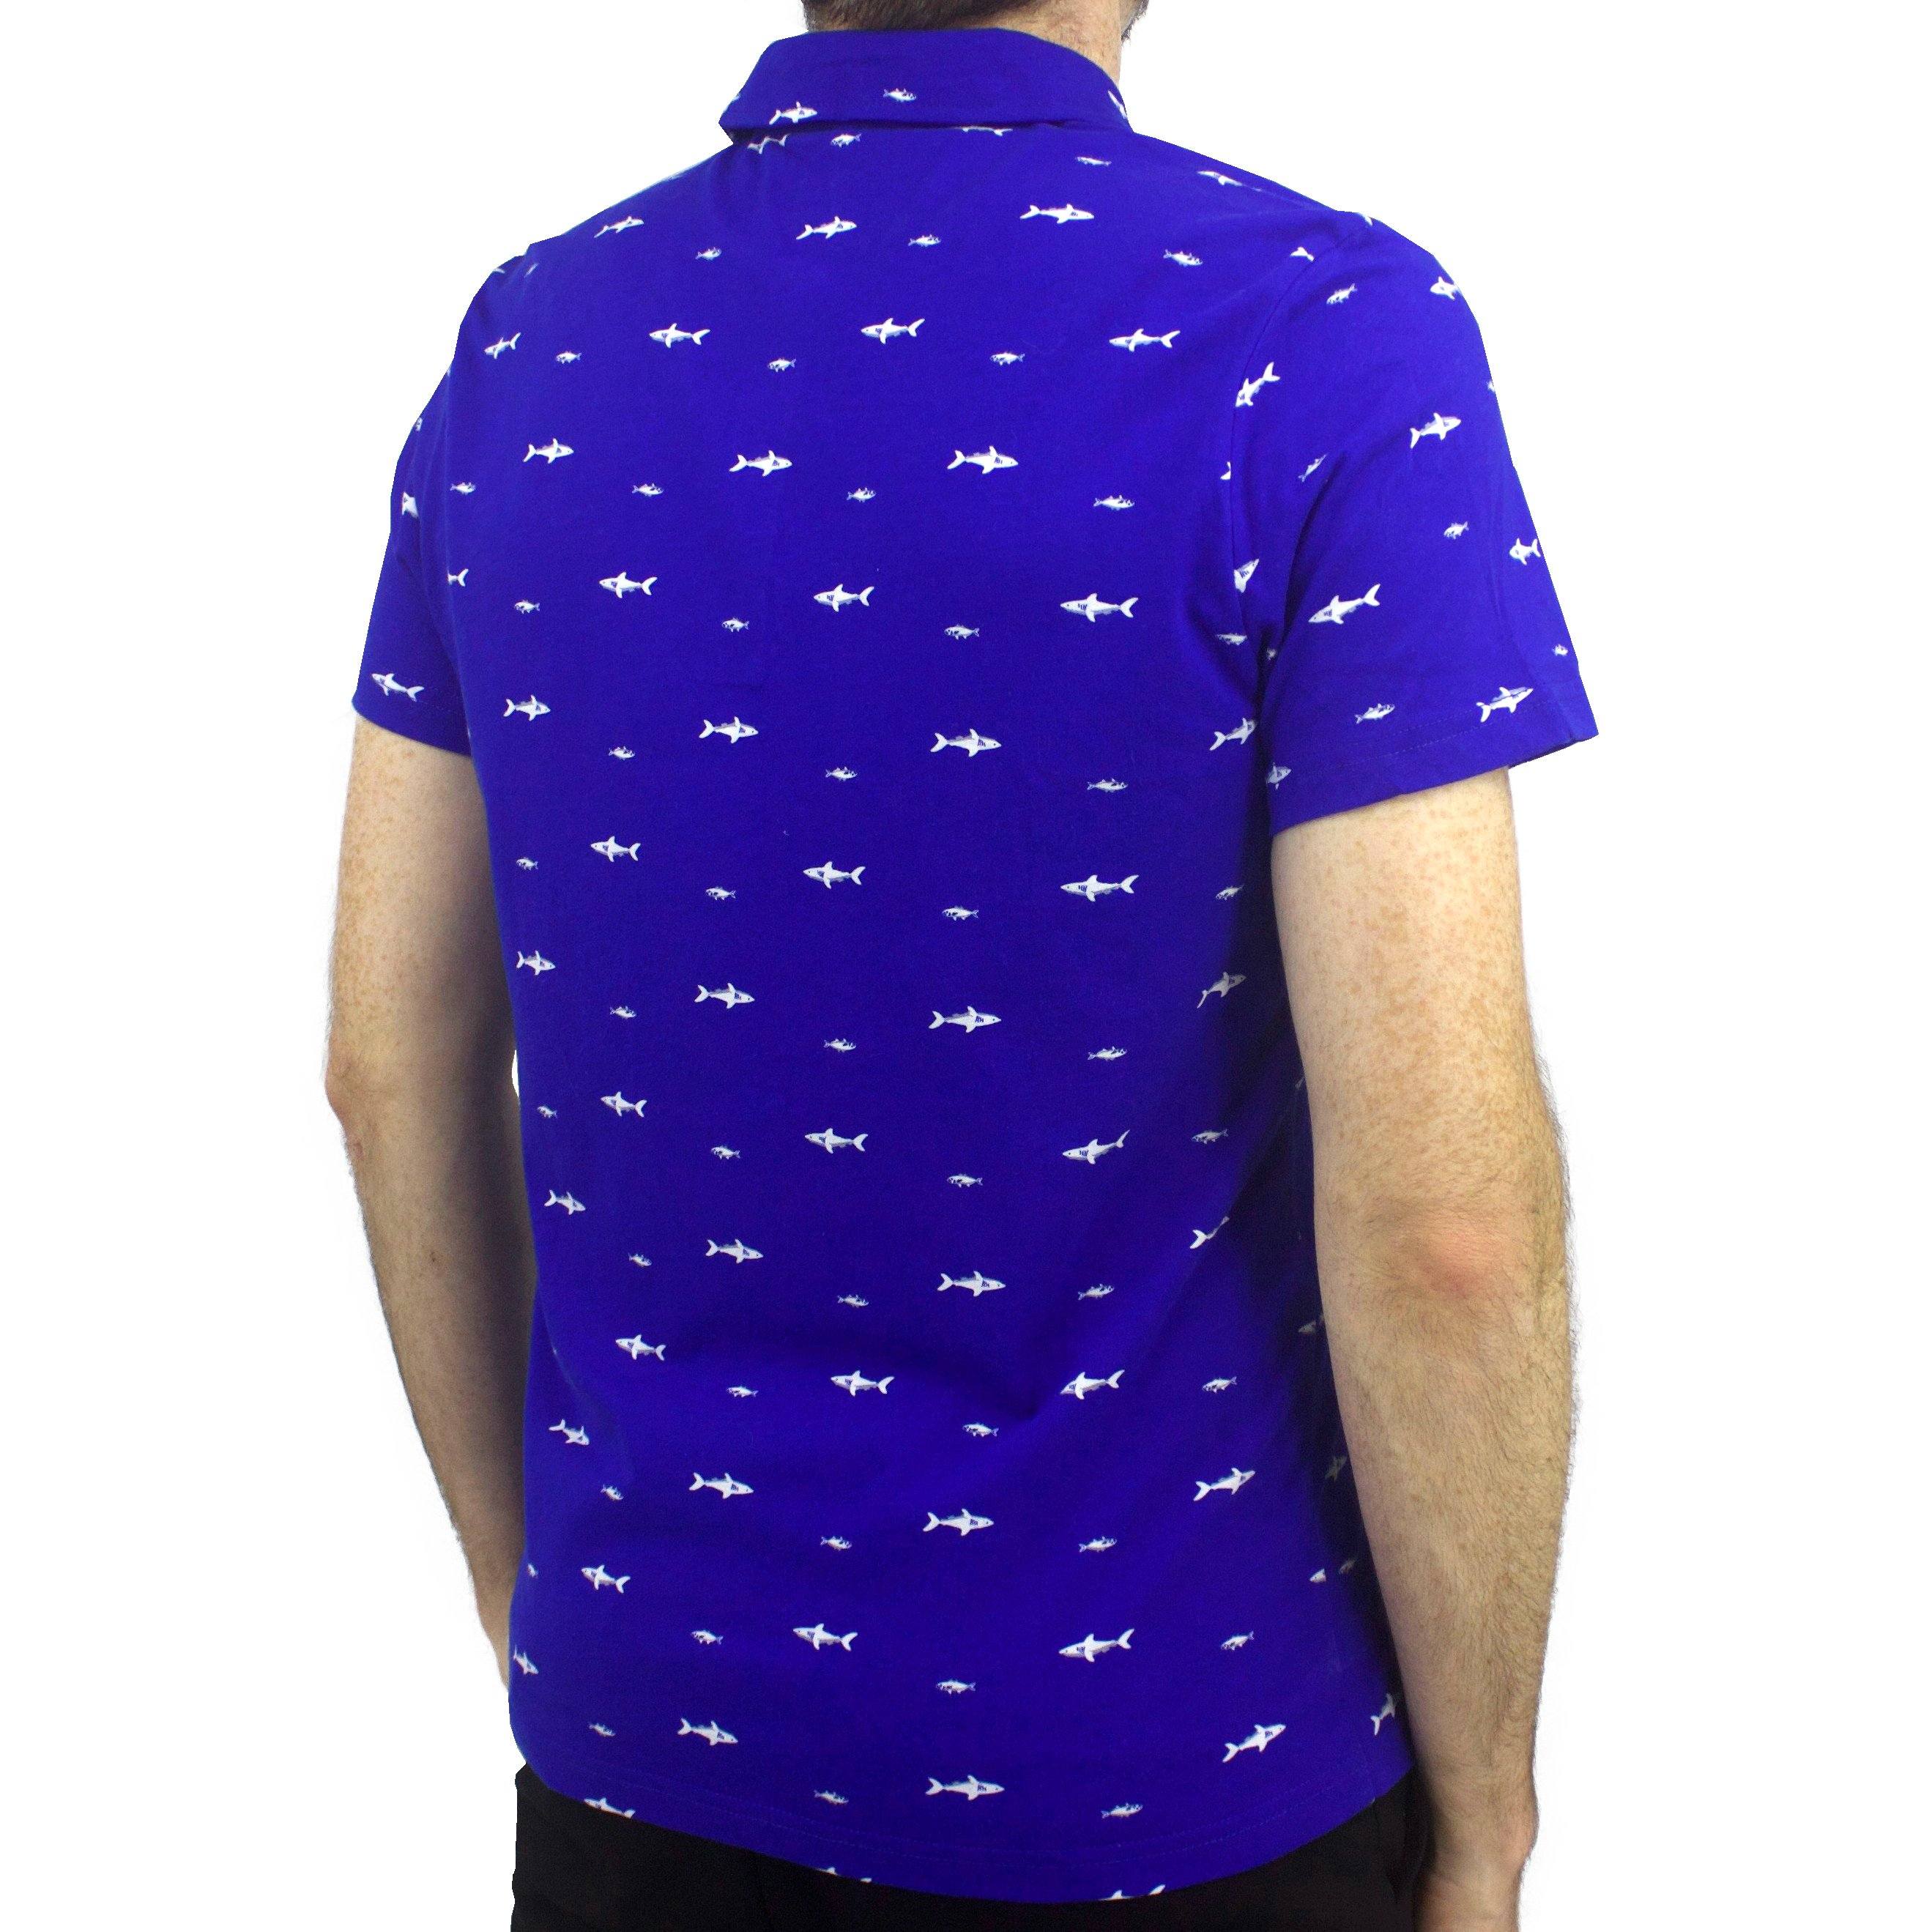 Rock Atoll Shark All Over Print Bright Blue Jersey Polo Tee Top Collared